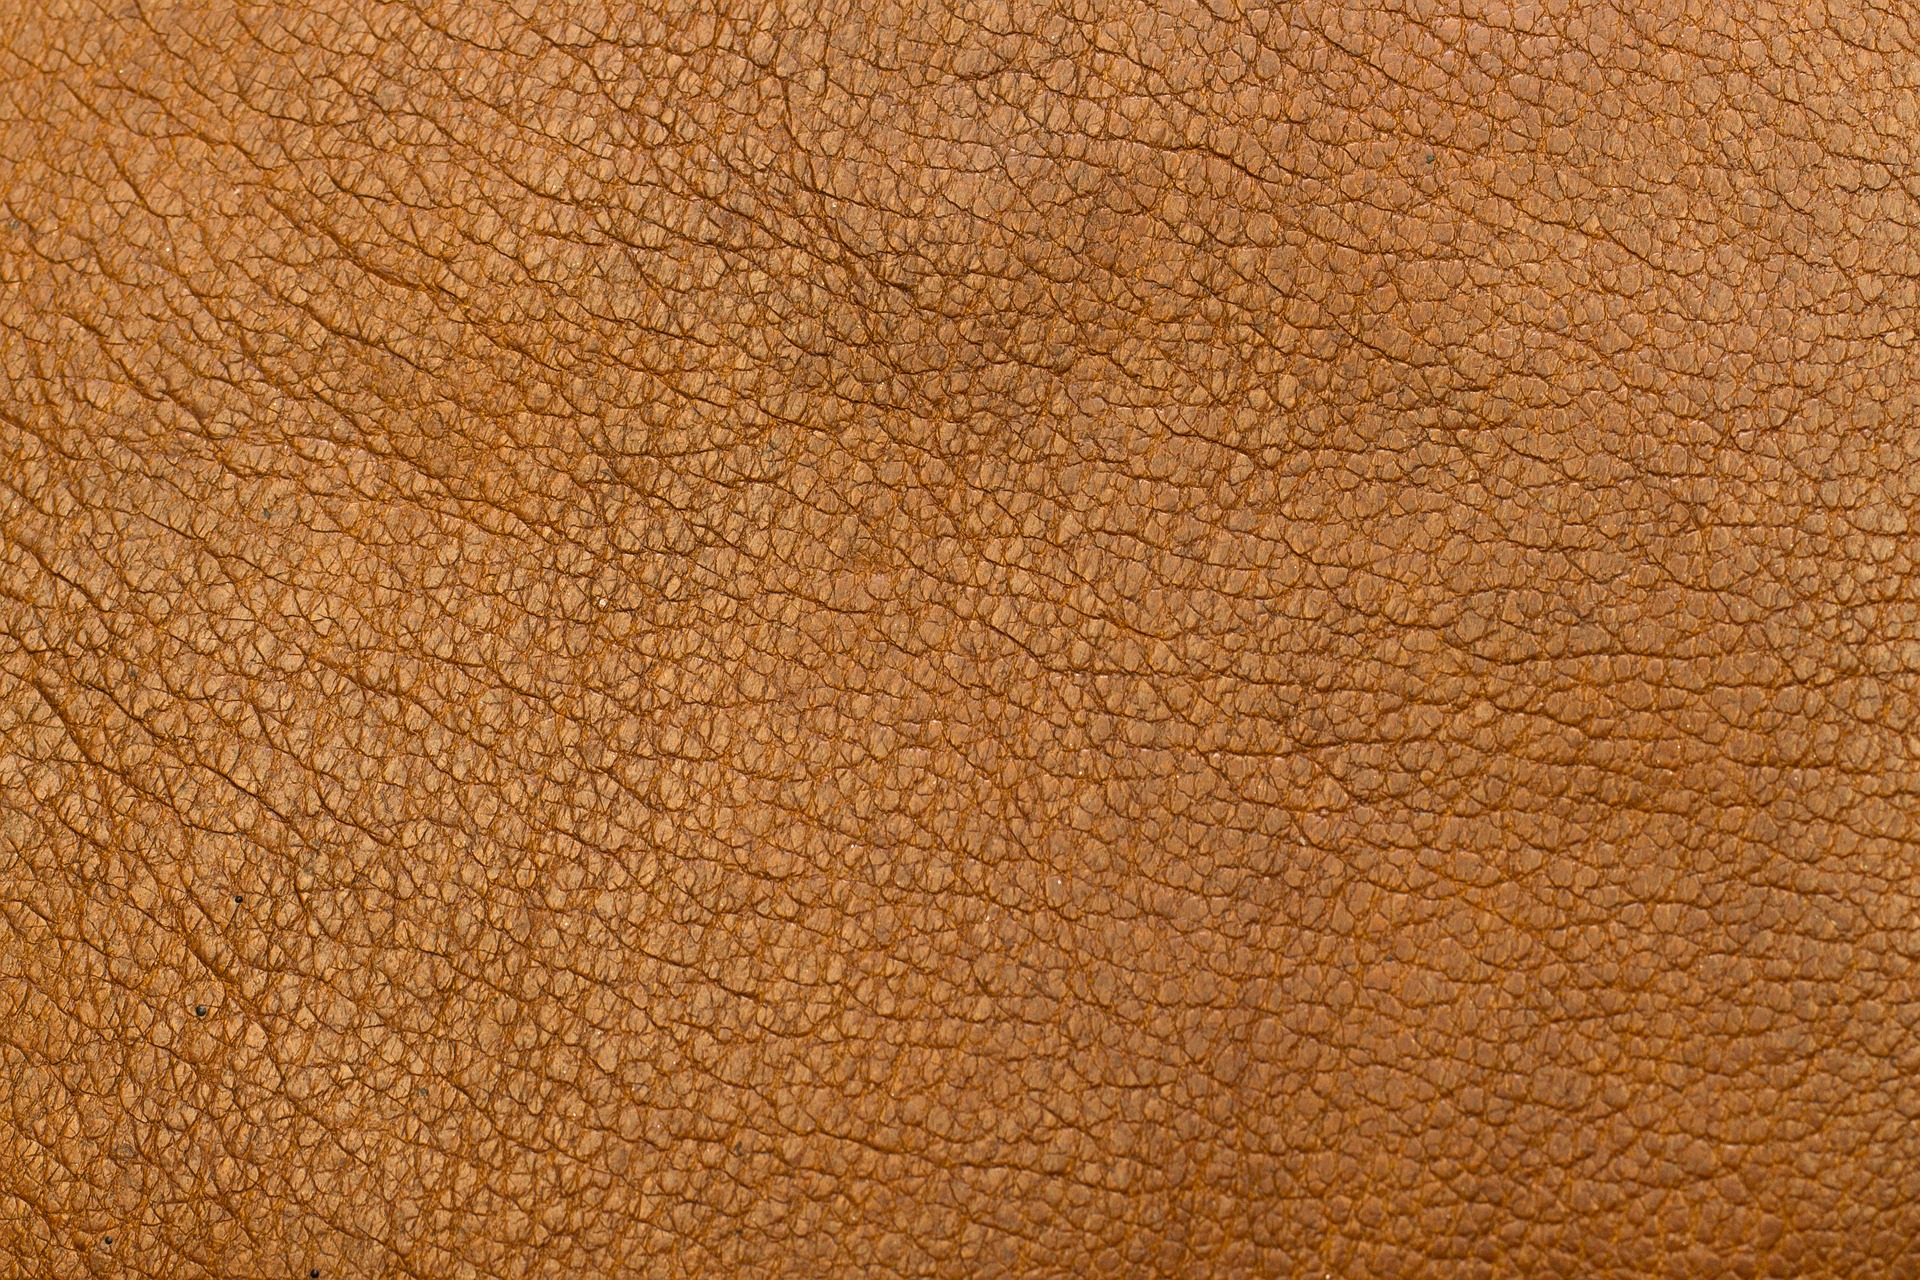 Synthetic Leather Market with Coronavirus (COVID-19) Effect Analysis to hit US$ 157.3 Bn by 2027